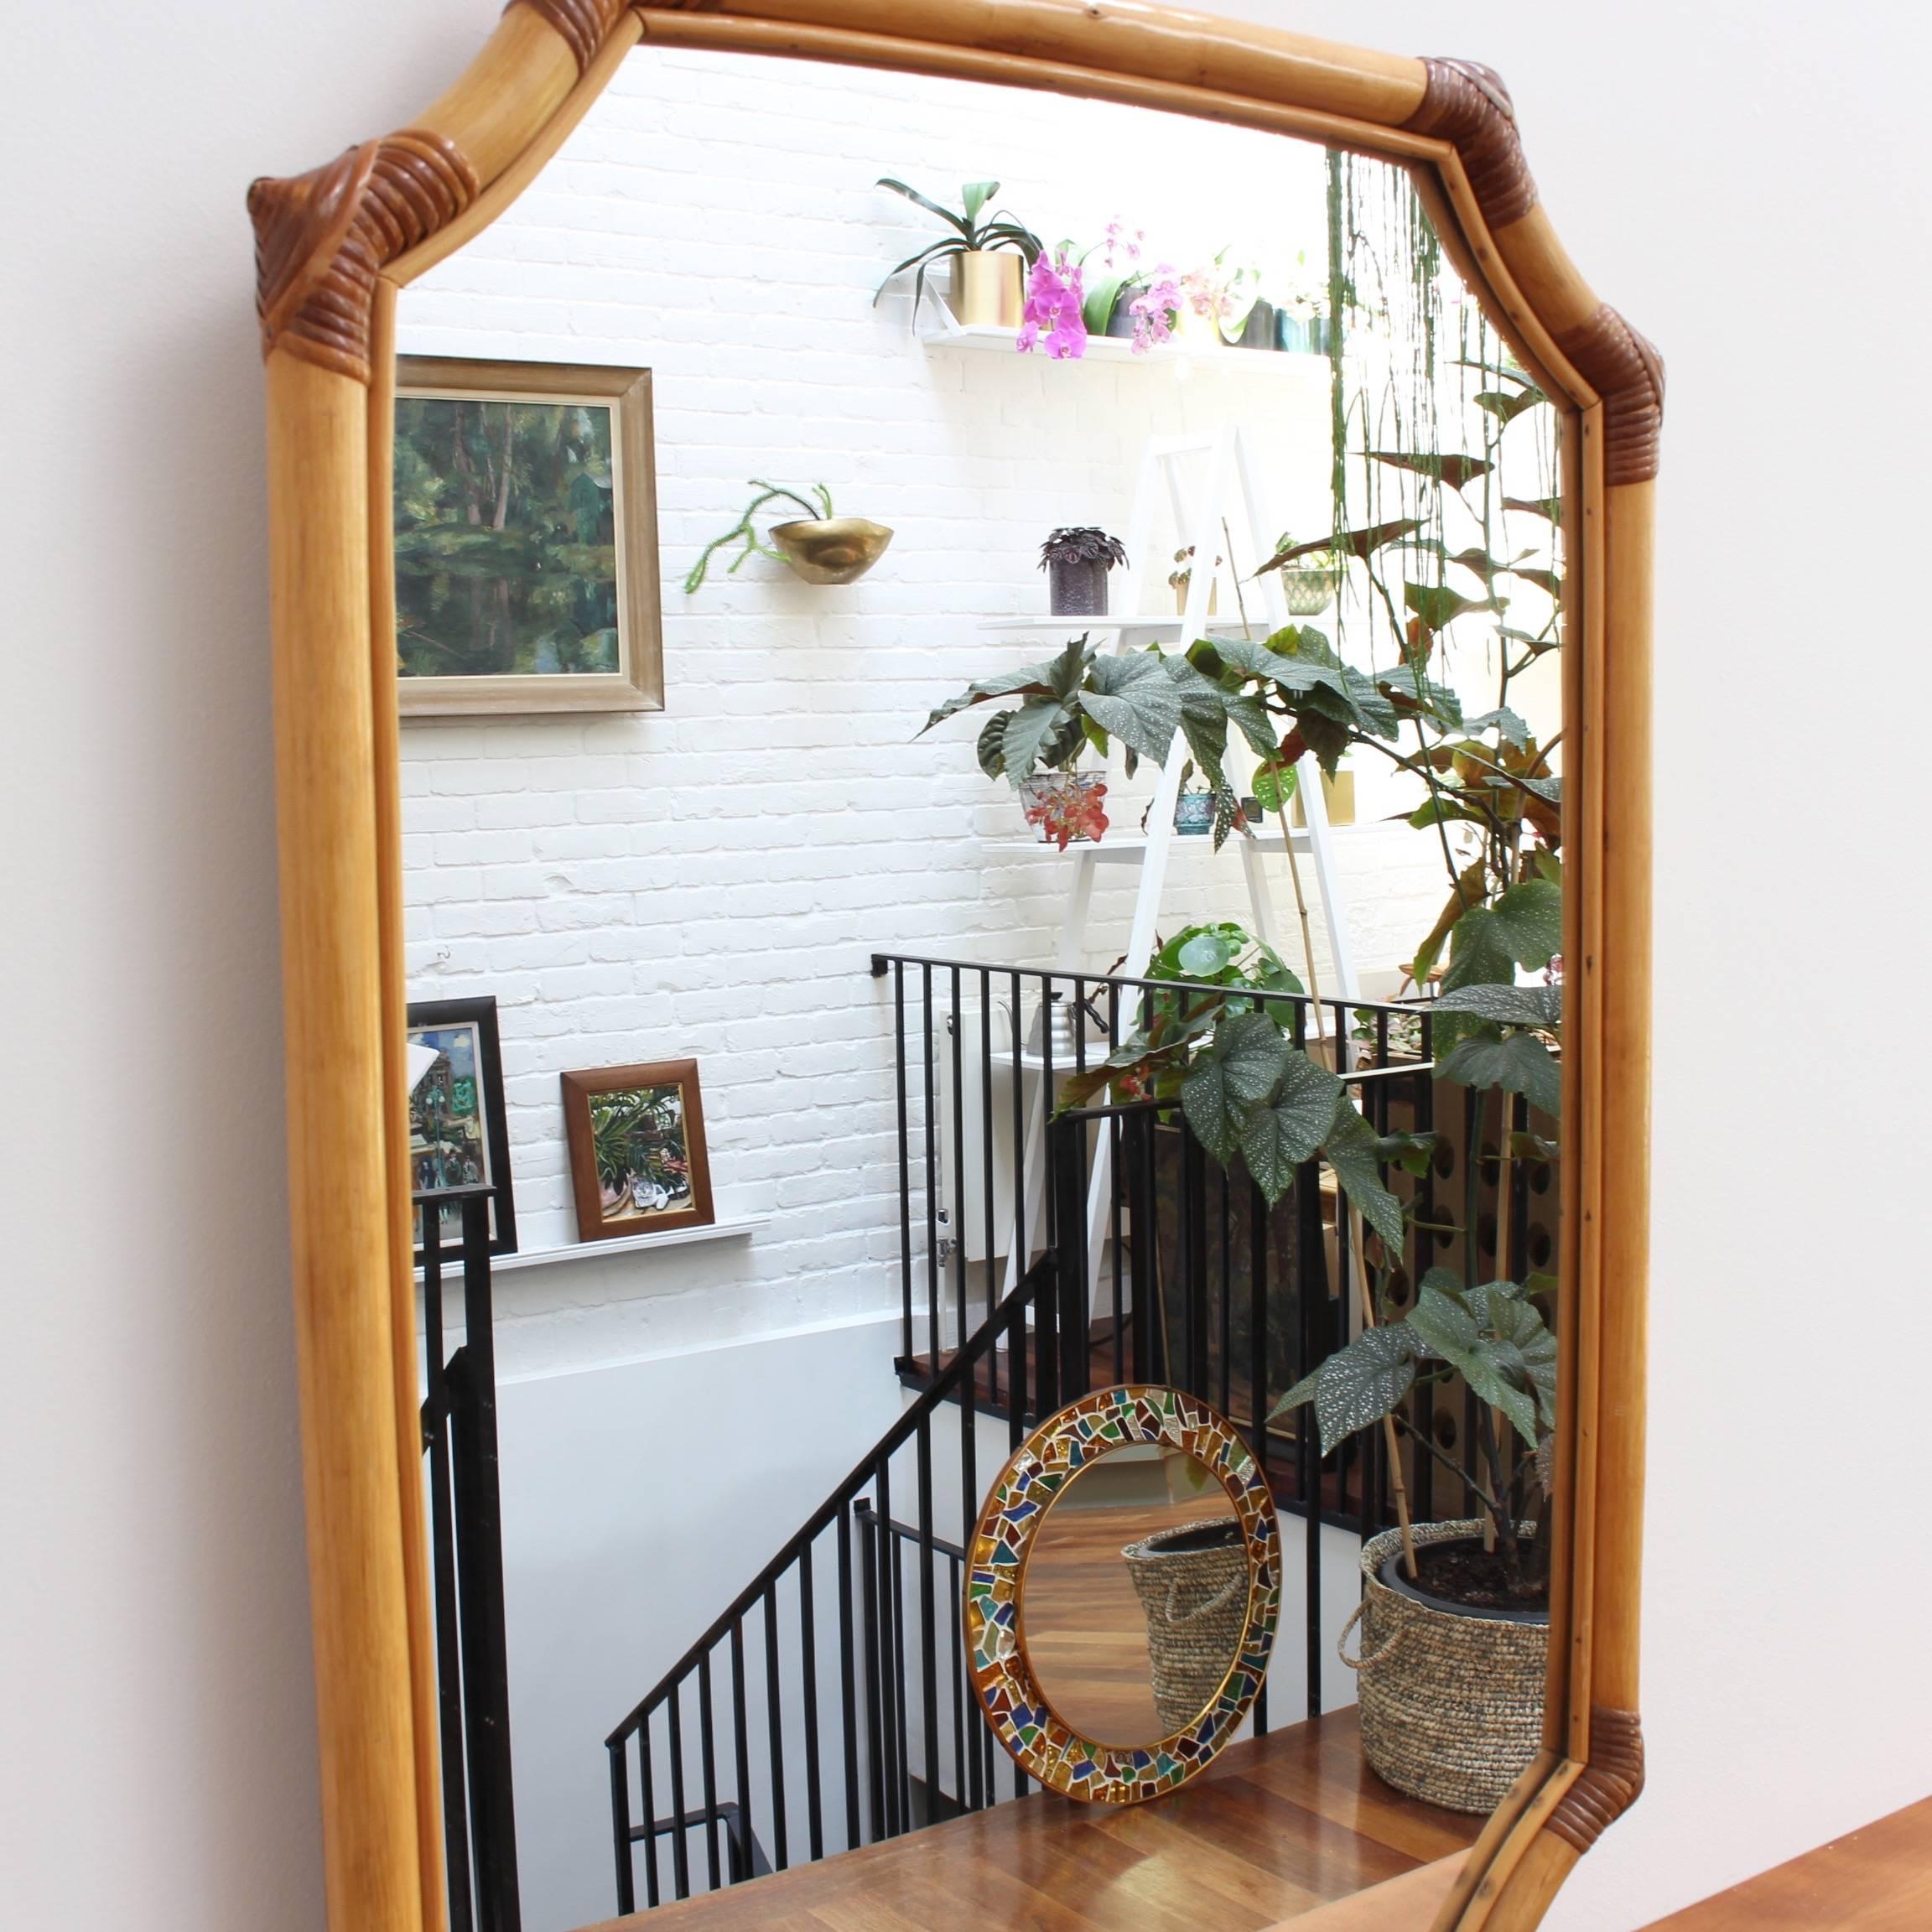 French bamboo and rattan vintage wall mirror, circa 1960s. This mirror has a delightful Asian-inspired shape formed by the bamboo frame and held together with rattan ties on the edges and curves. There is a characterful, aged patina and some